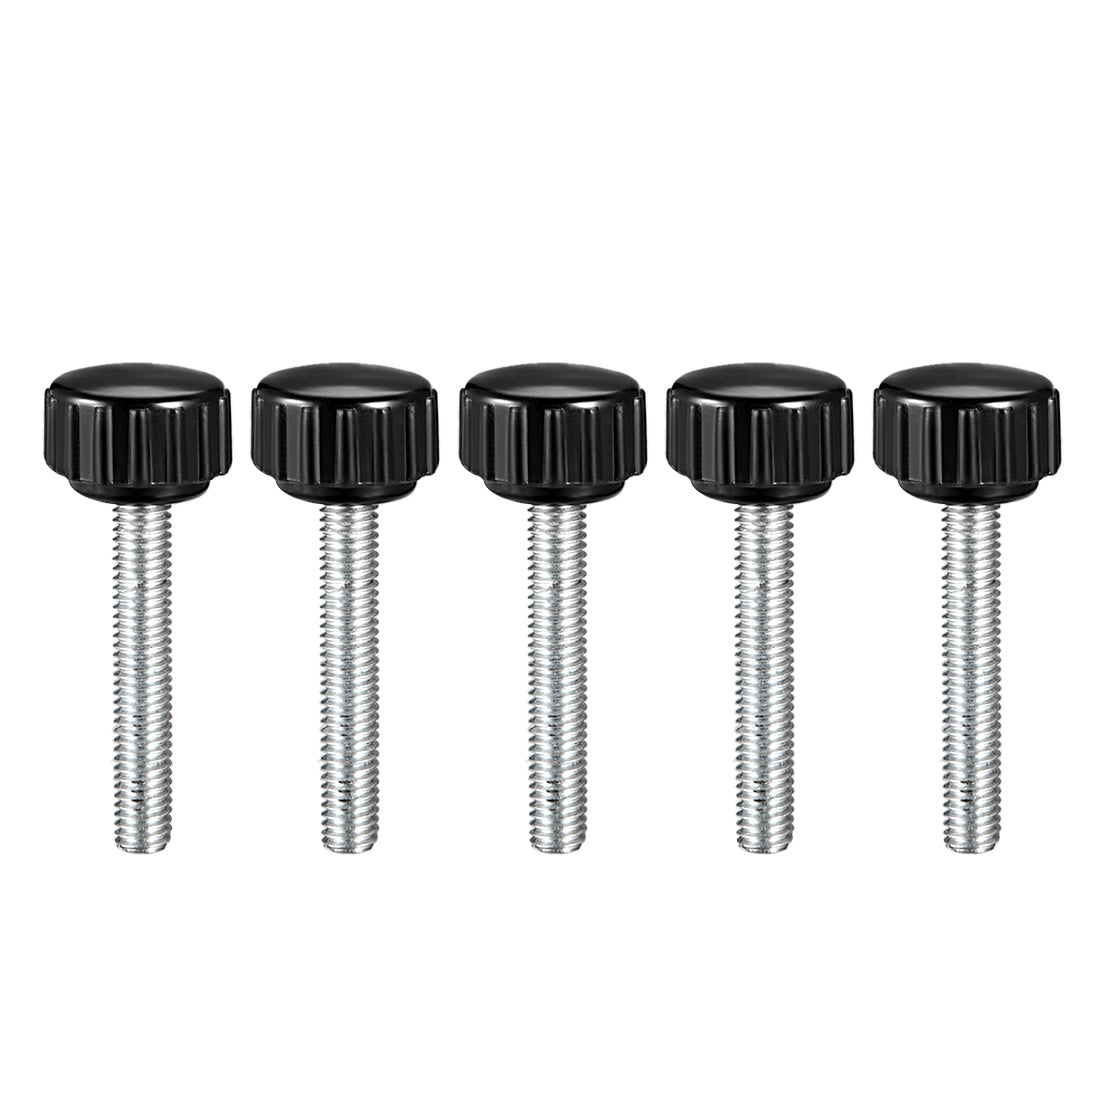 Uxcell Uxcell M5 x 20mm Male Thread Knurled Clamping Knobs Grip Thumb Screw on Type Round Head 5 Pcs